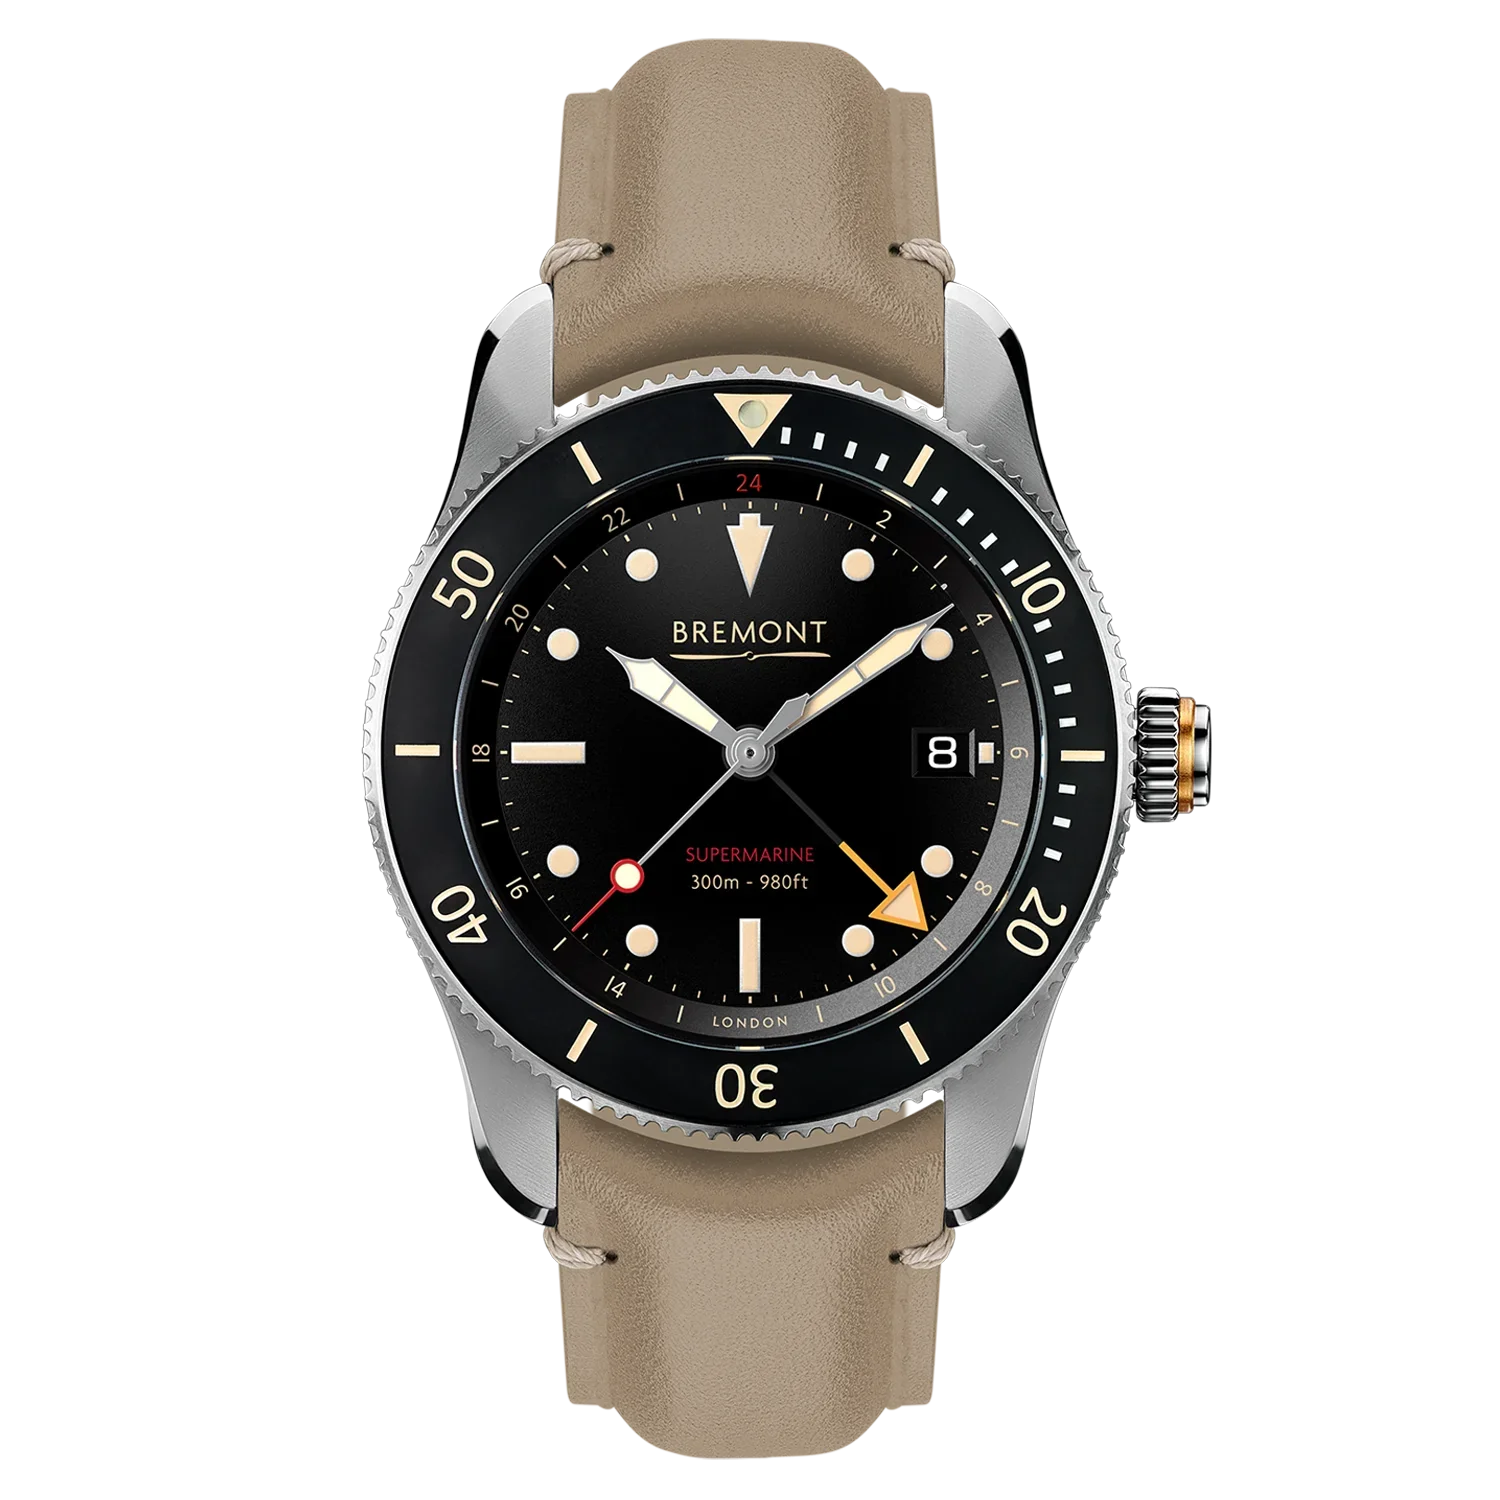 Bremont Watch Company Watches | Mens | Supermarine S302